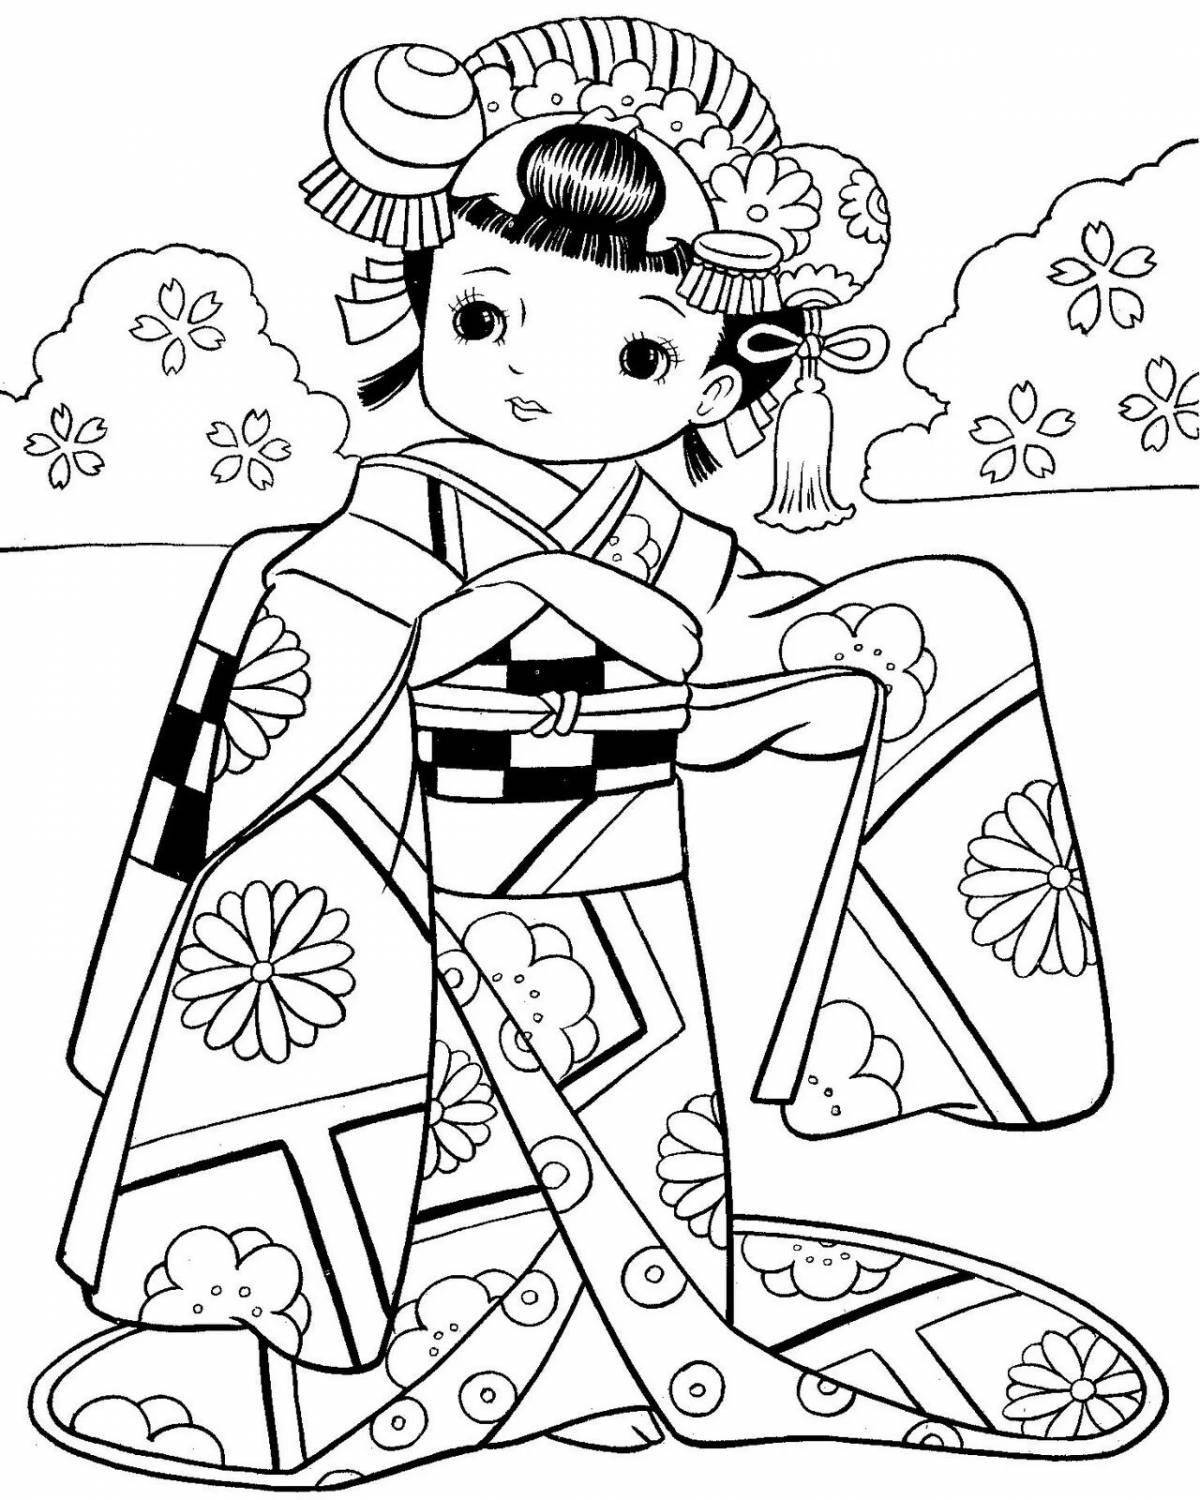 Coloring page asia